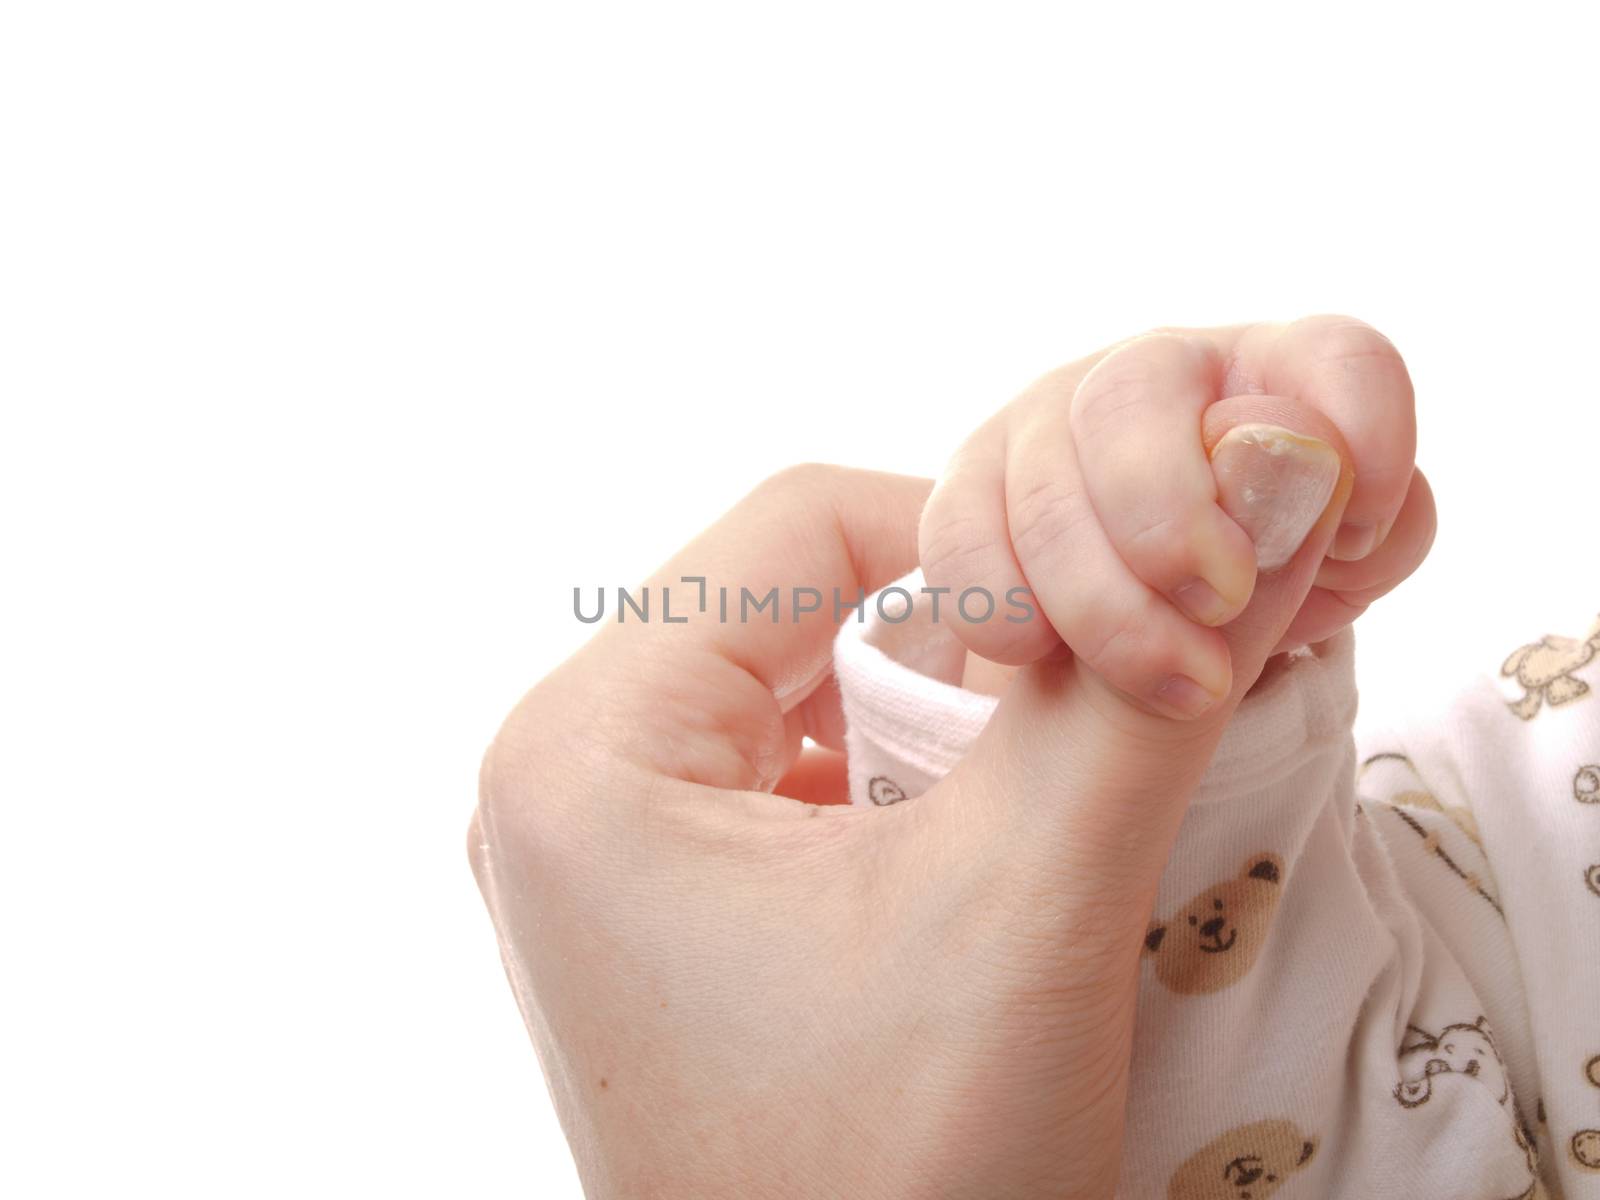 Baby connecting with mother by holding hands towards white background